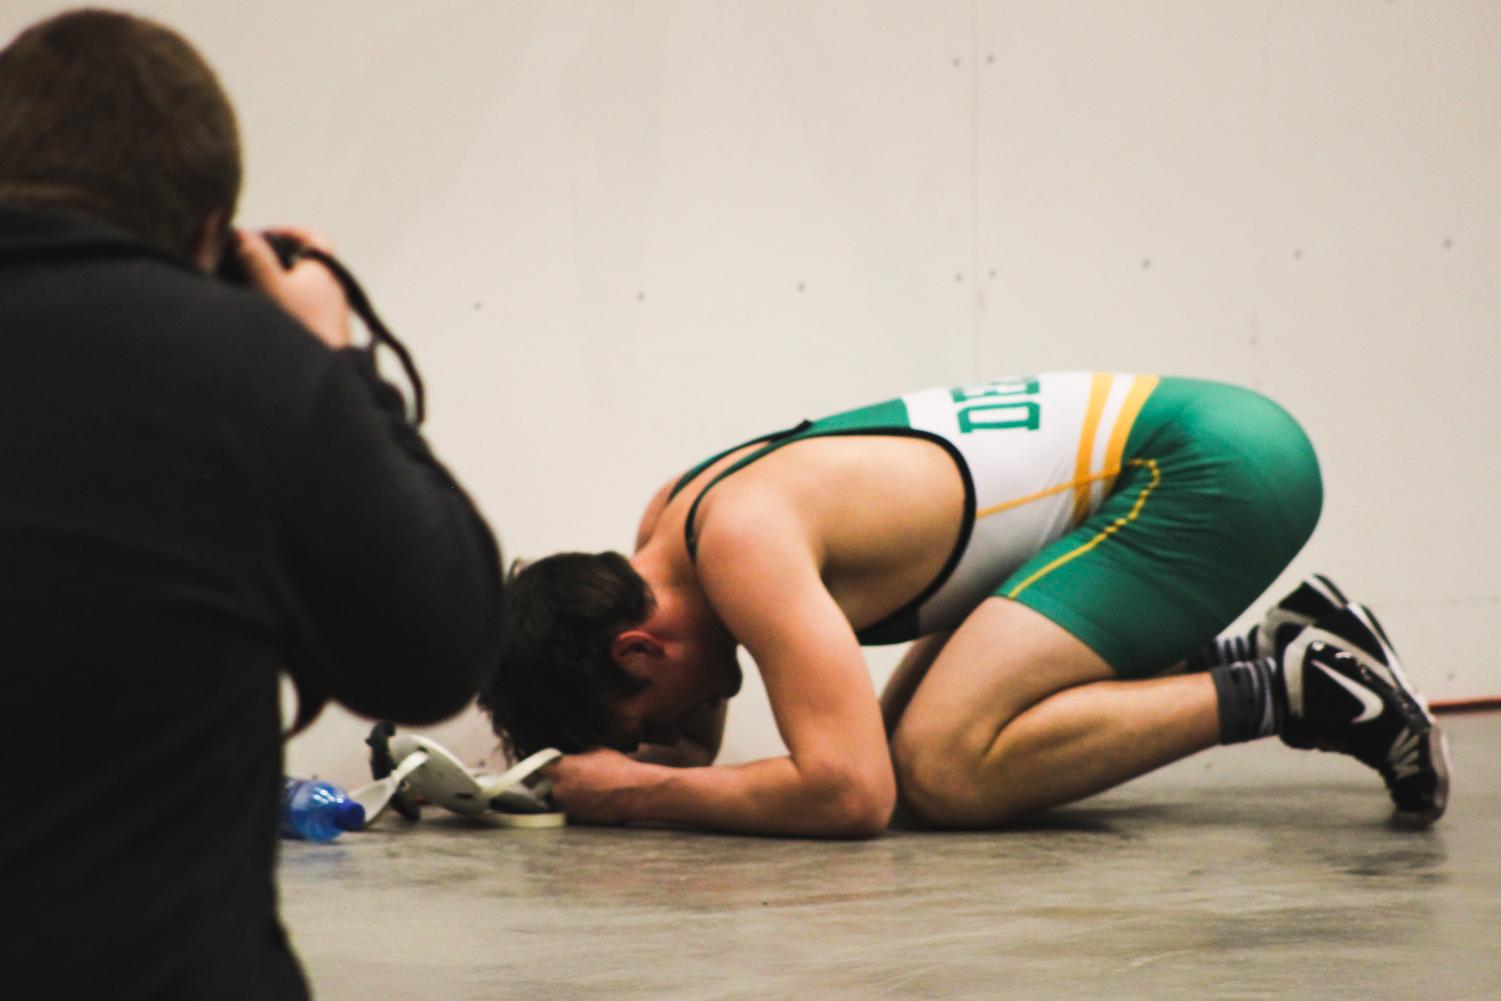 Derby+wrestling+competes+at+State+photo+gallery+%28Photos+by+Tanner+Hopkins%29